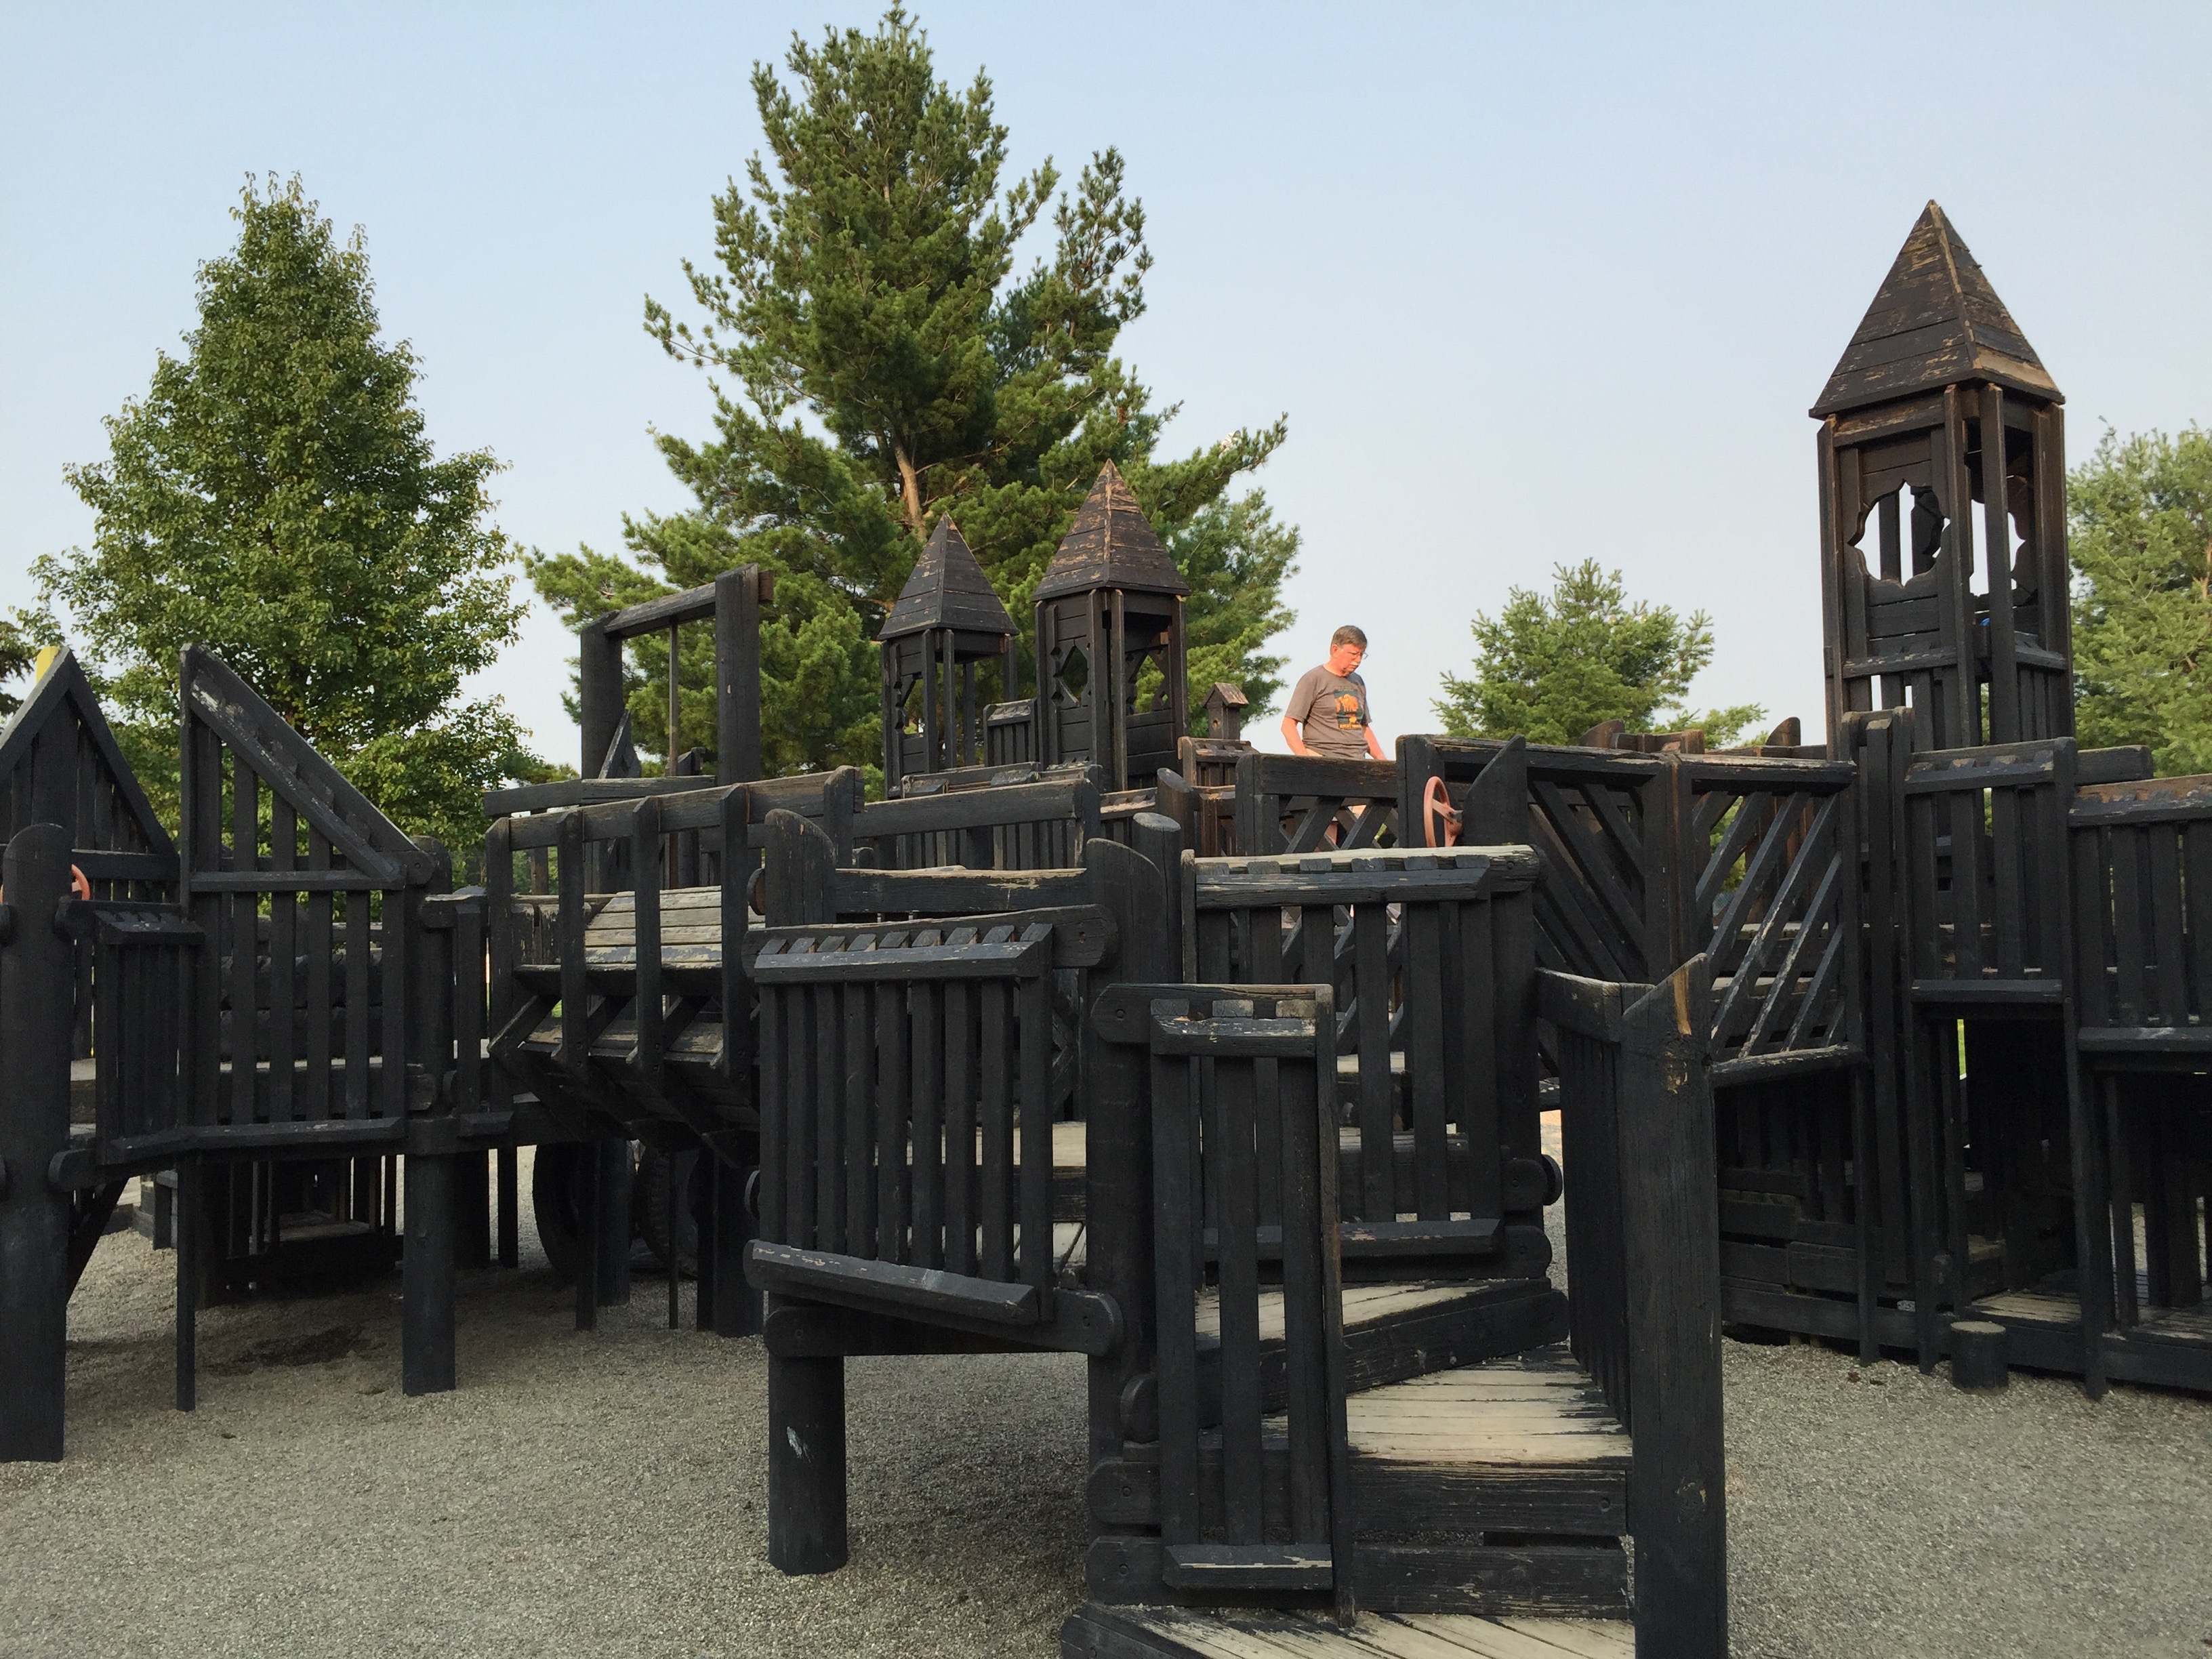 The playground at the Commons. Towers and climbing structures with a castle theme painted black.